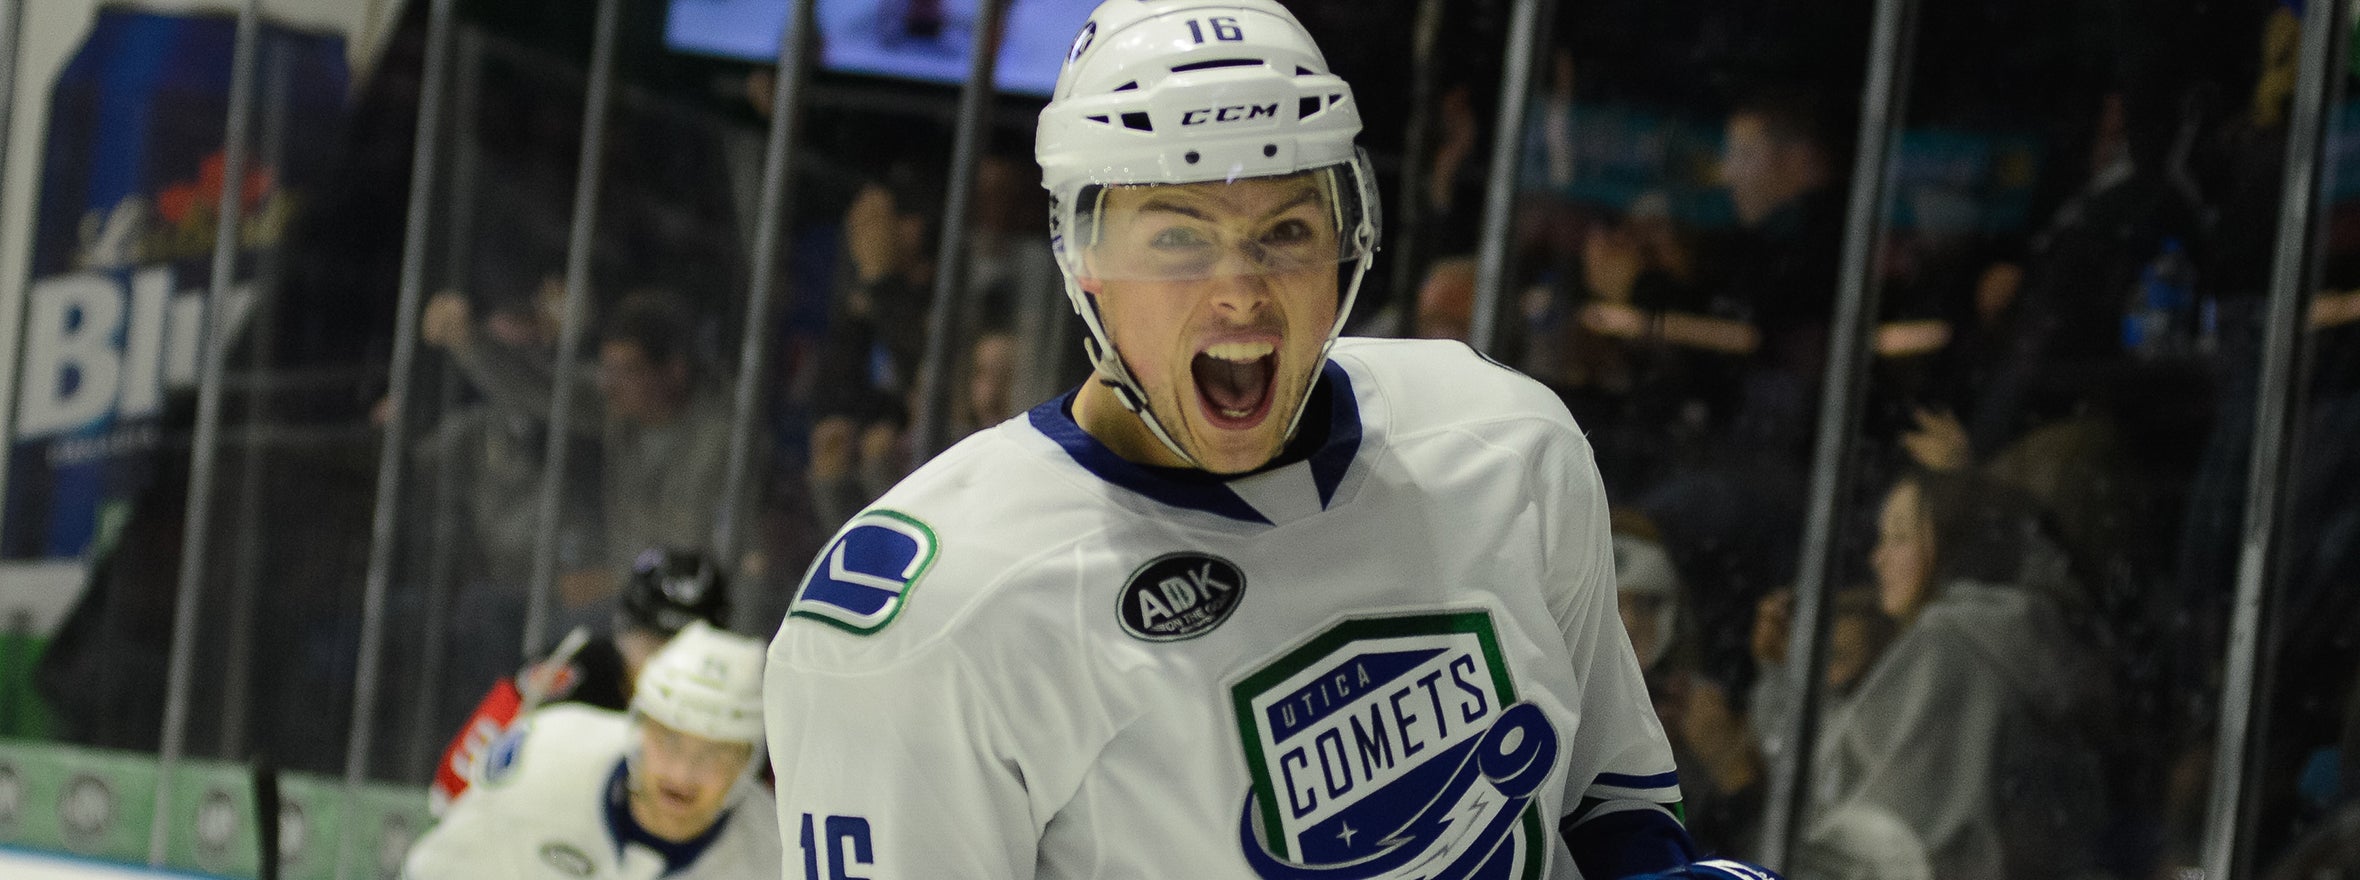 COMETS RIP OFF FOUR UNANSWERED GOALS IN WIN OVER DEVILS